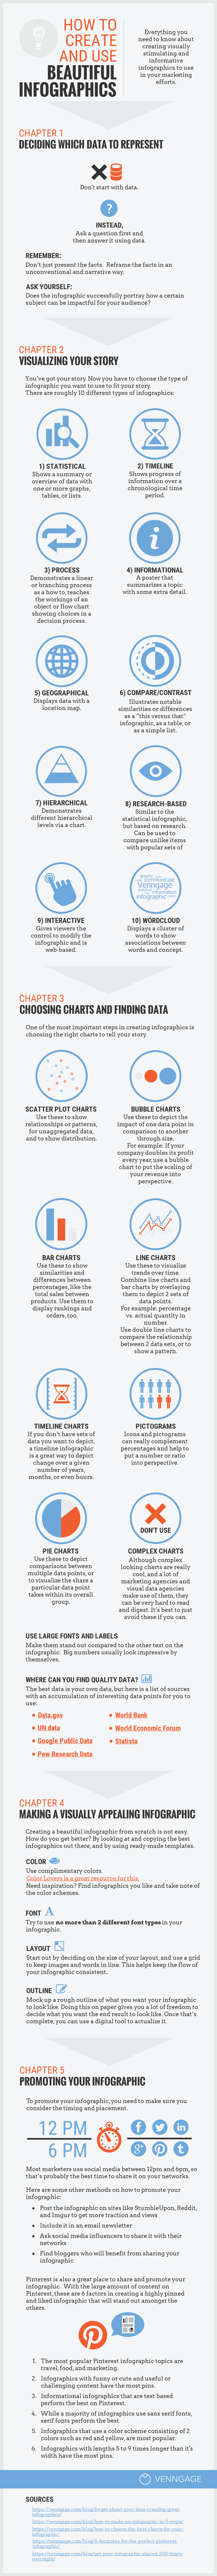 HubSpot-How-to-Create-Infographics-Ebook